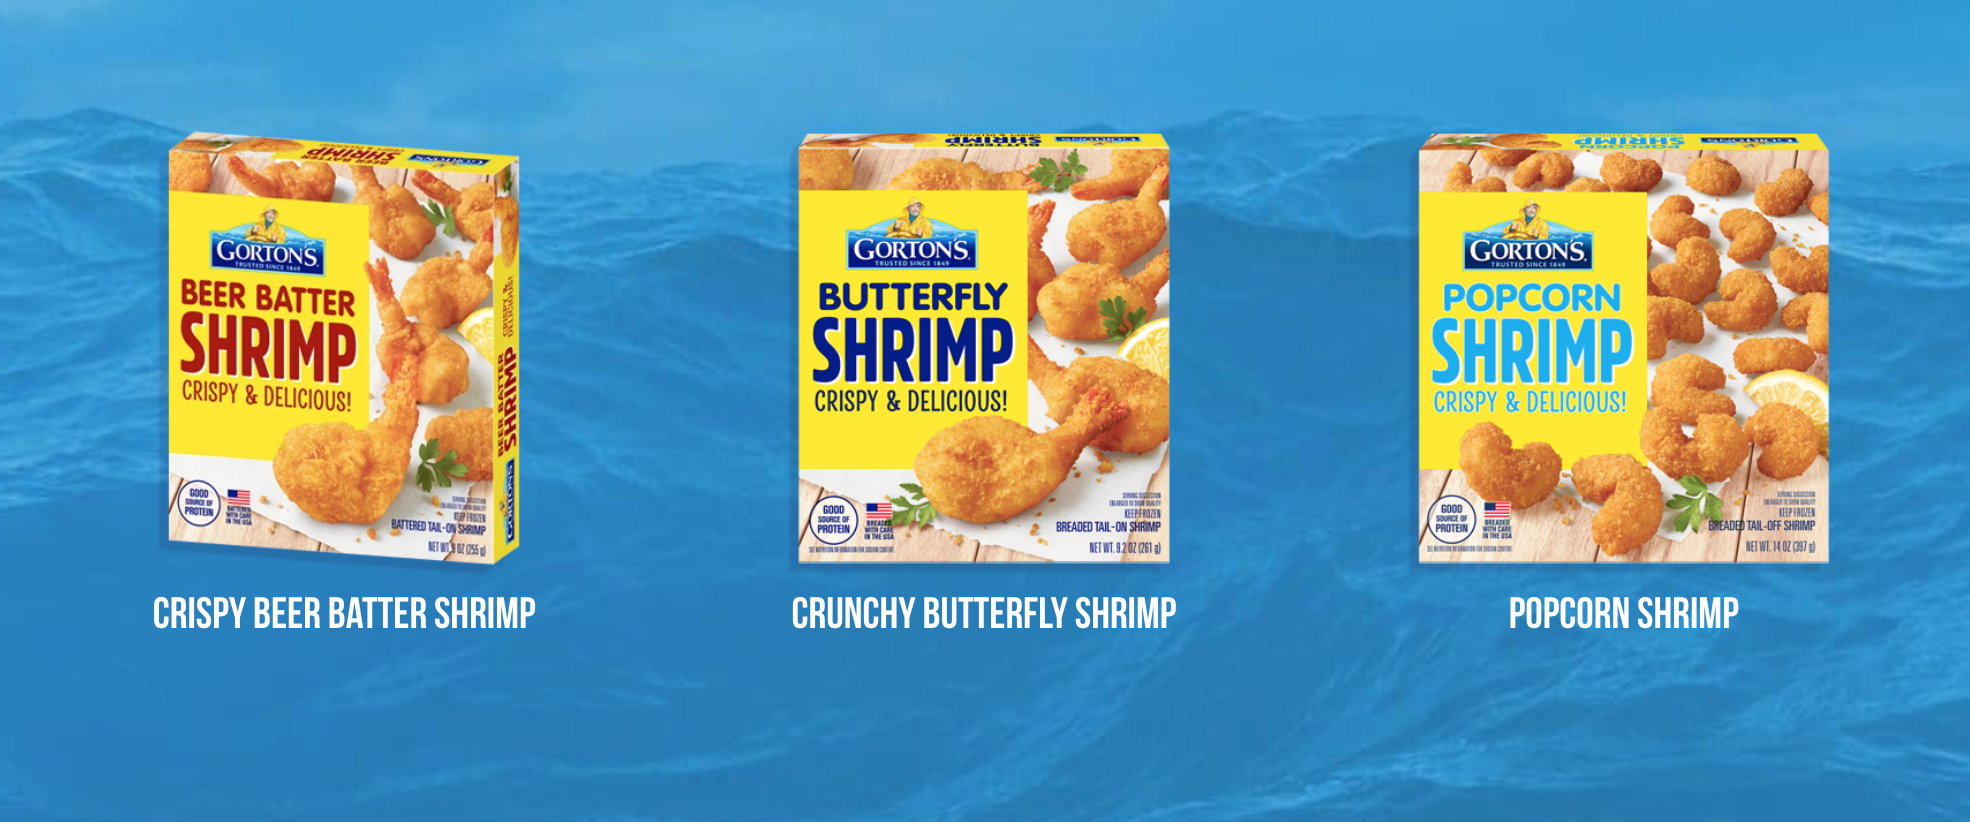 Nissui uses Gorton's brand to sell more shrimp in US retail ...